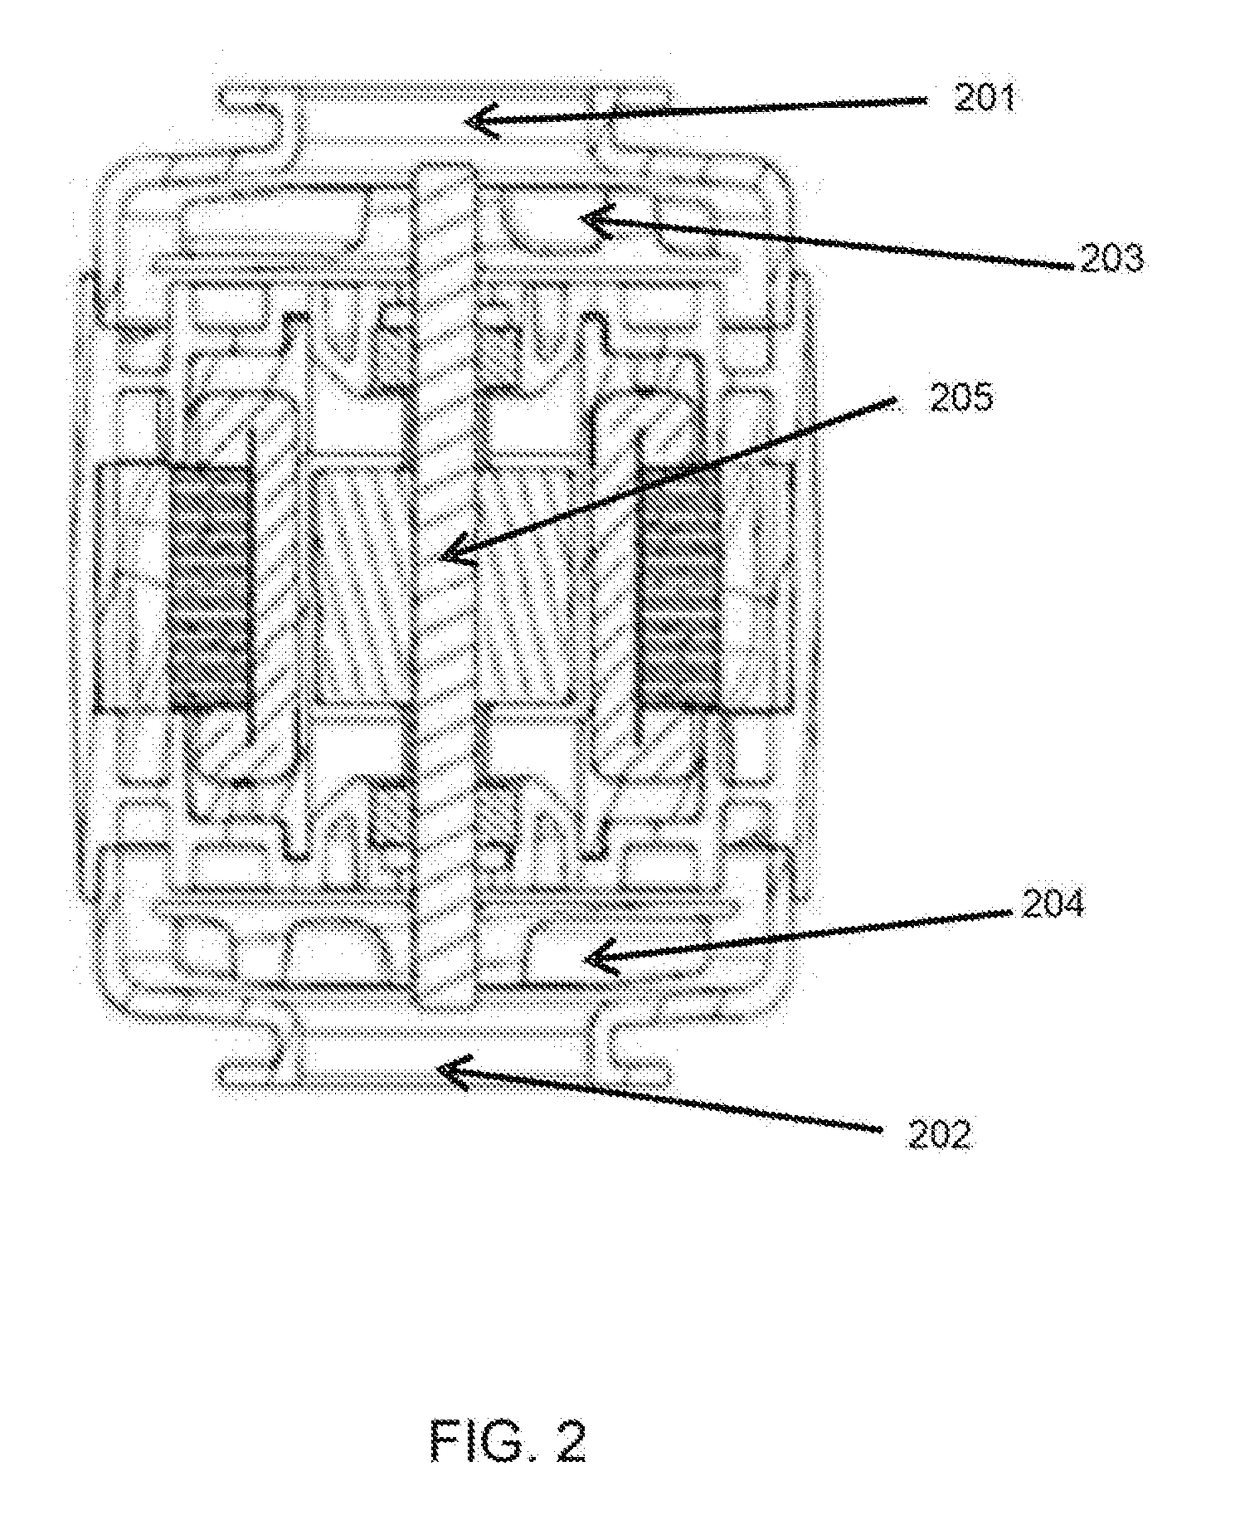 Wearable device for delivering air